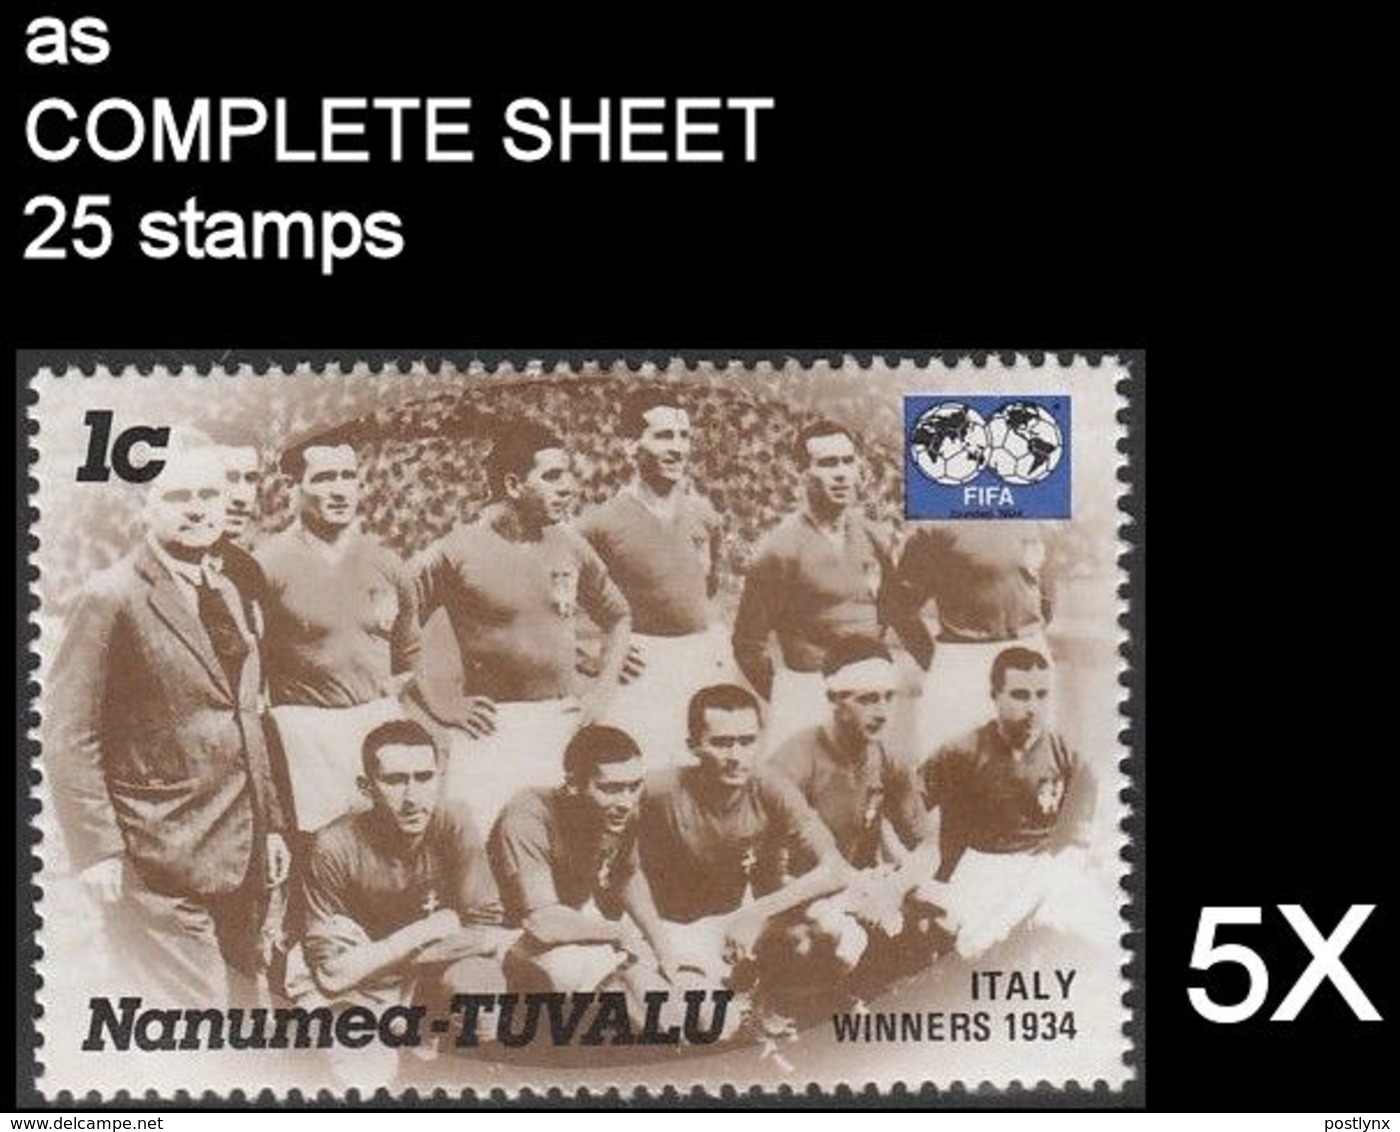 CV:€27.81  BULK:5x  TUVALU-Nanumea 1986 World Cup Mexico Italy 1934 1c COMPLETE SHEET:25 Stamps - 1934 – Italie